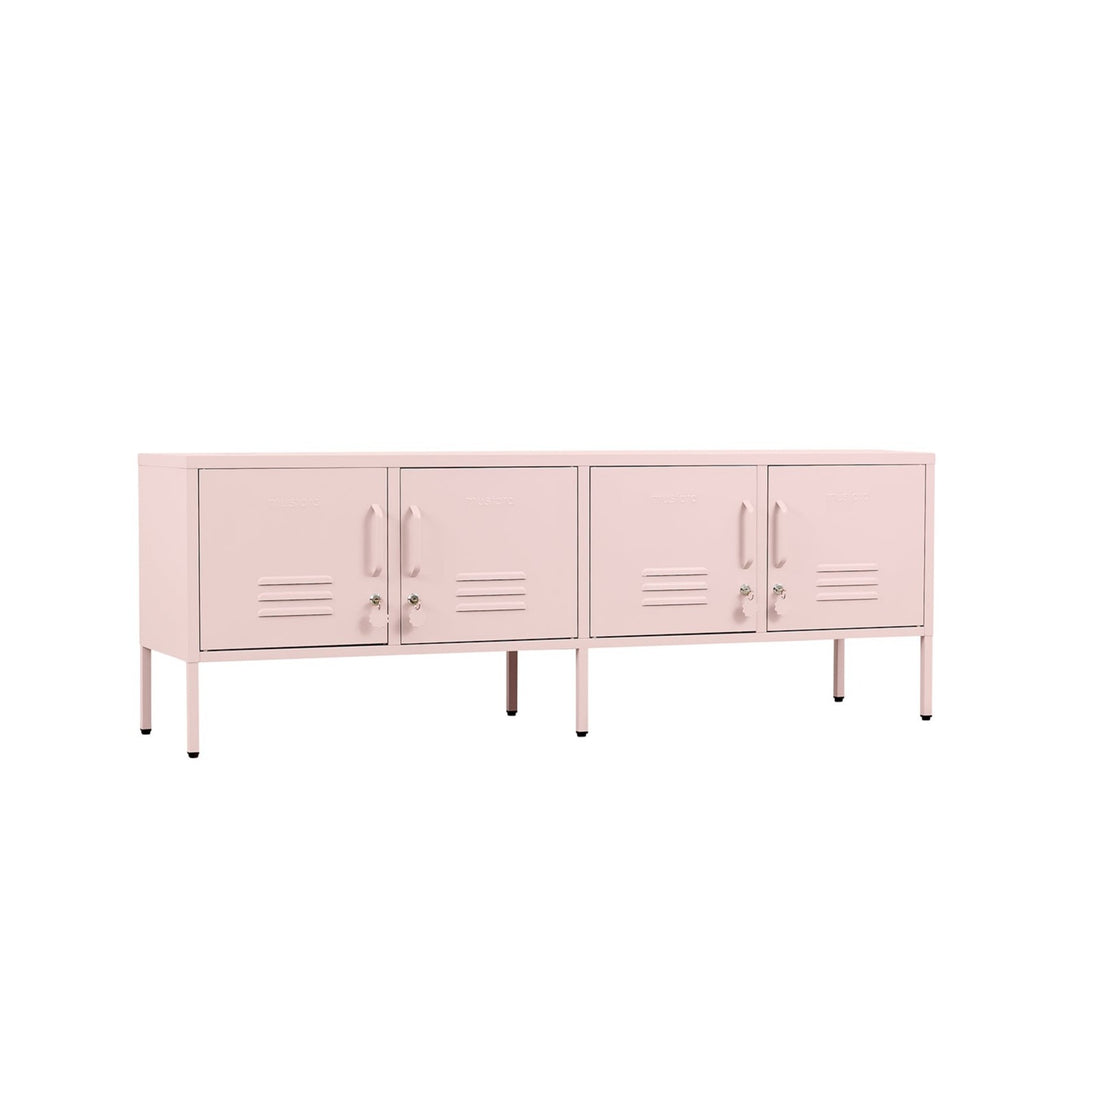 NEW The Standard in Blush